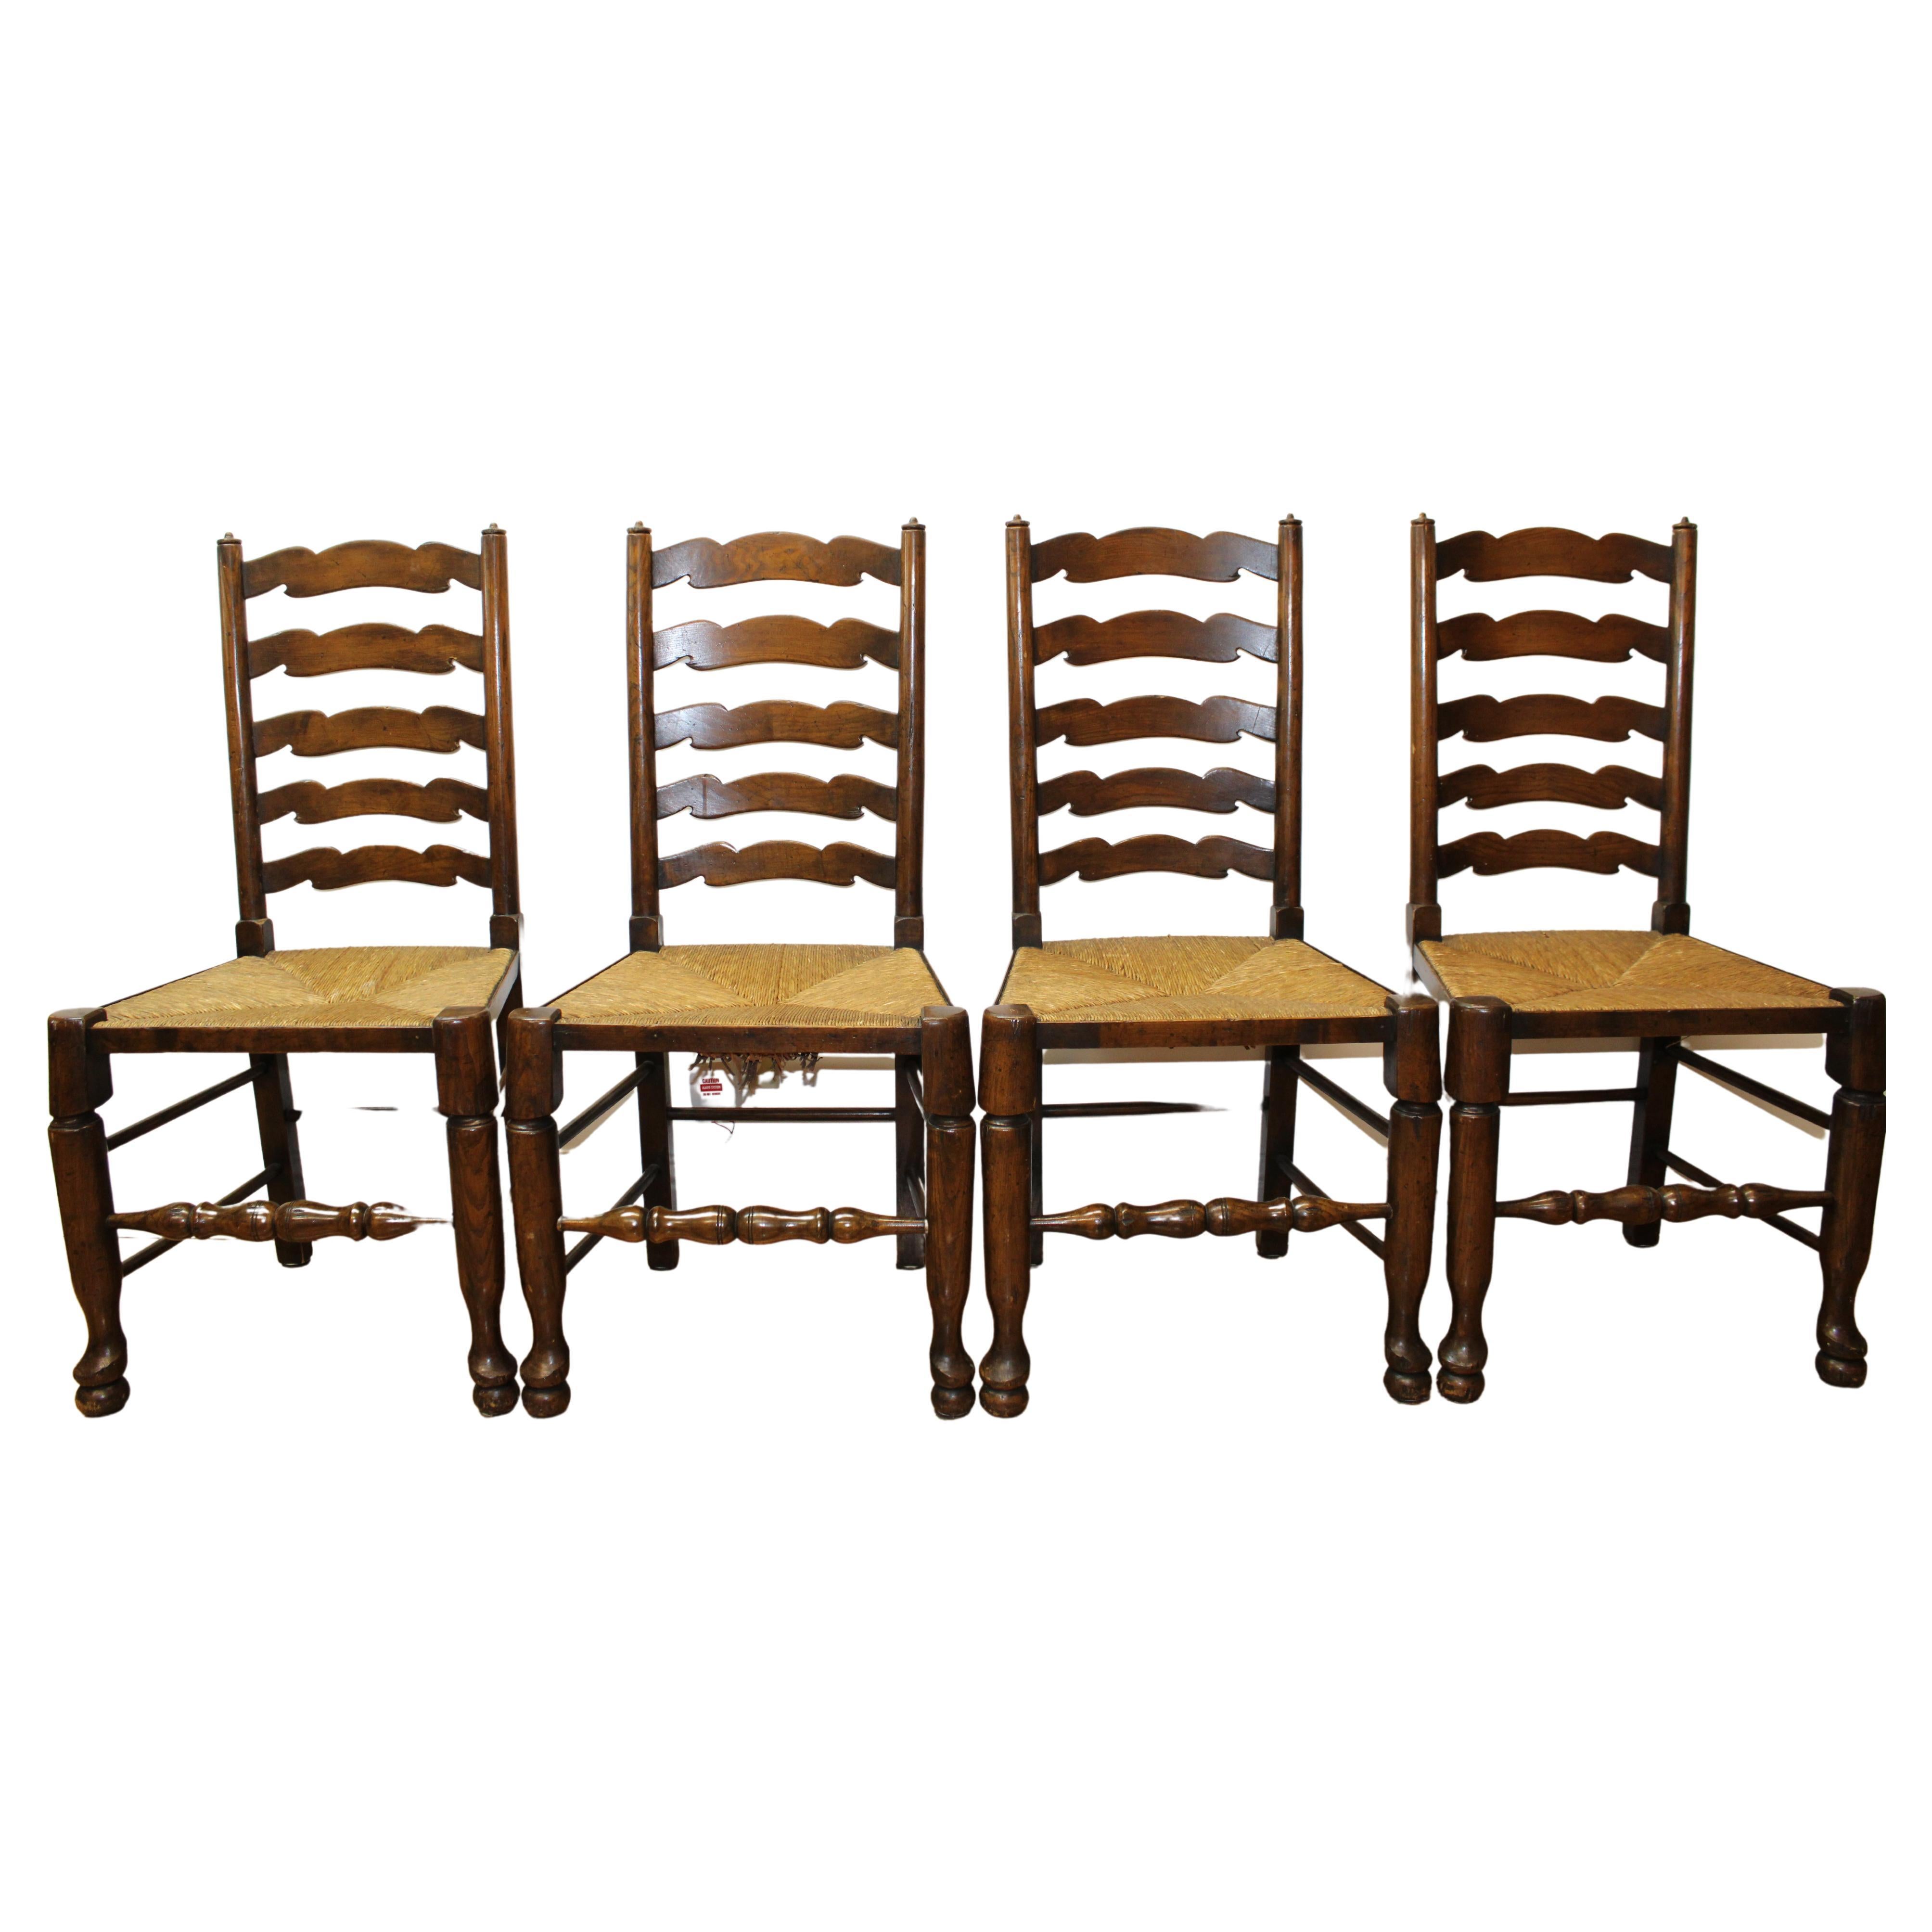 European Wood Ladderback Chairs w/ Woven Seats For Sale